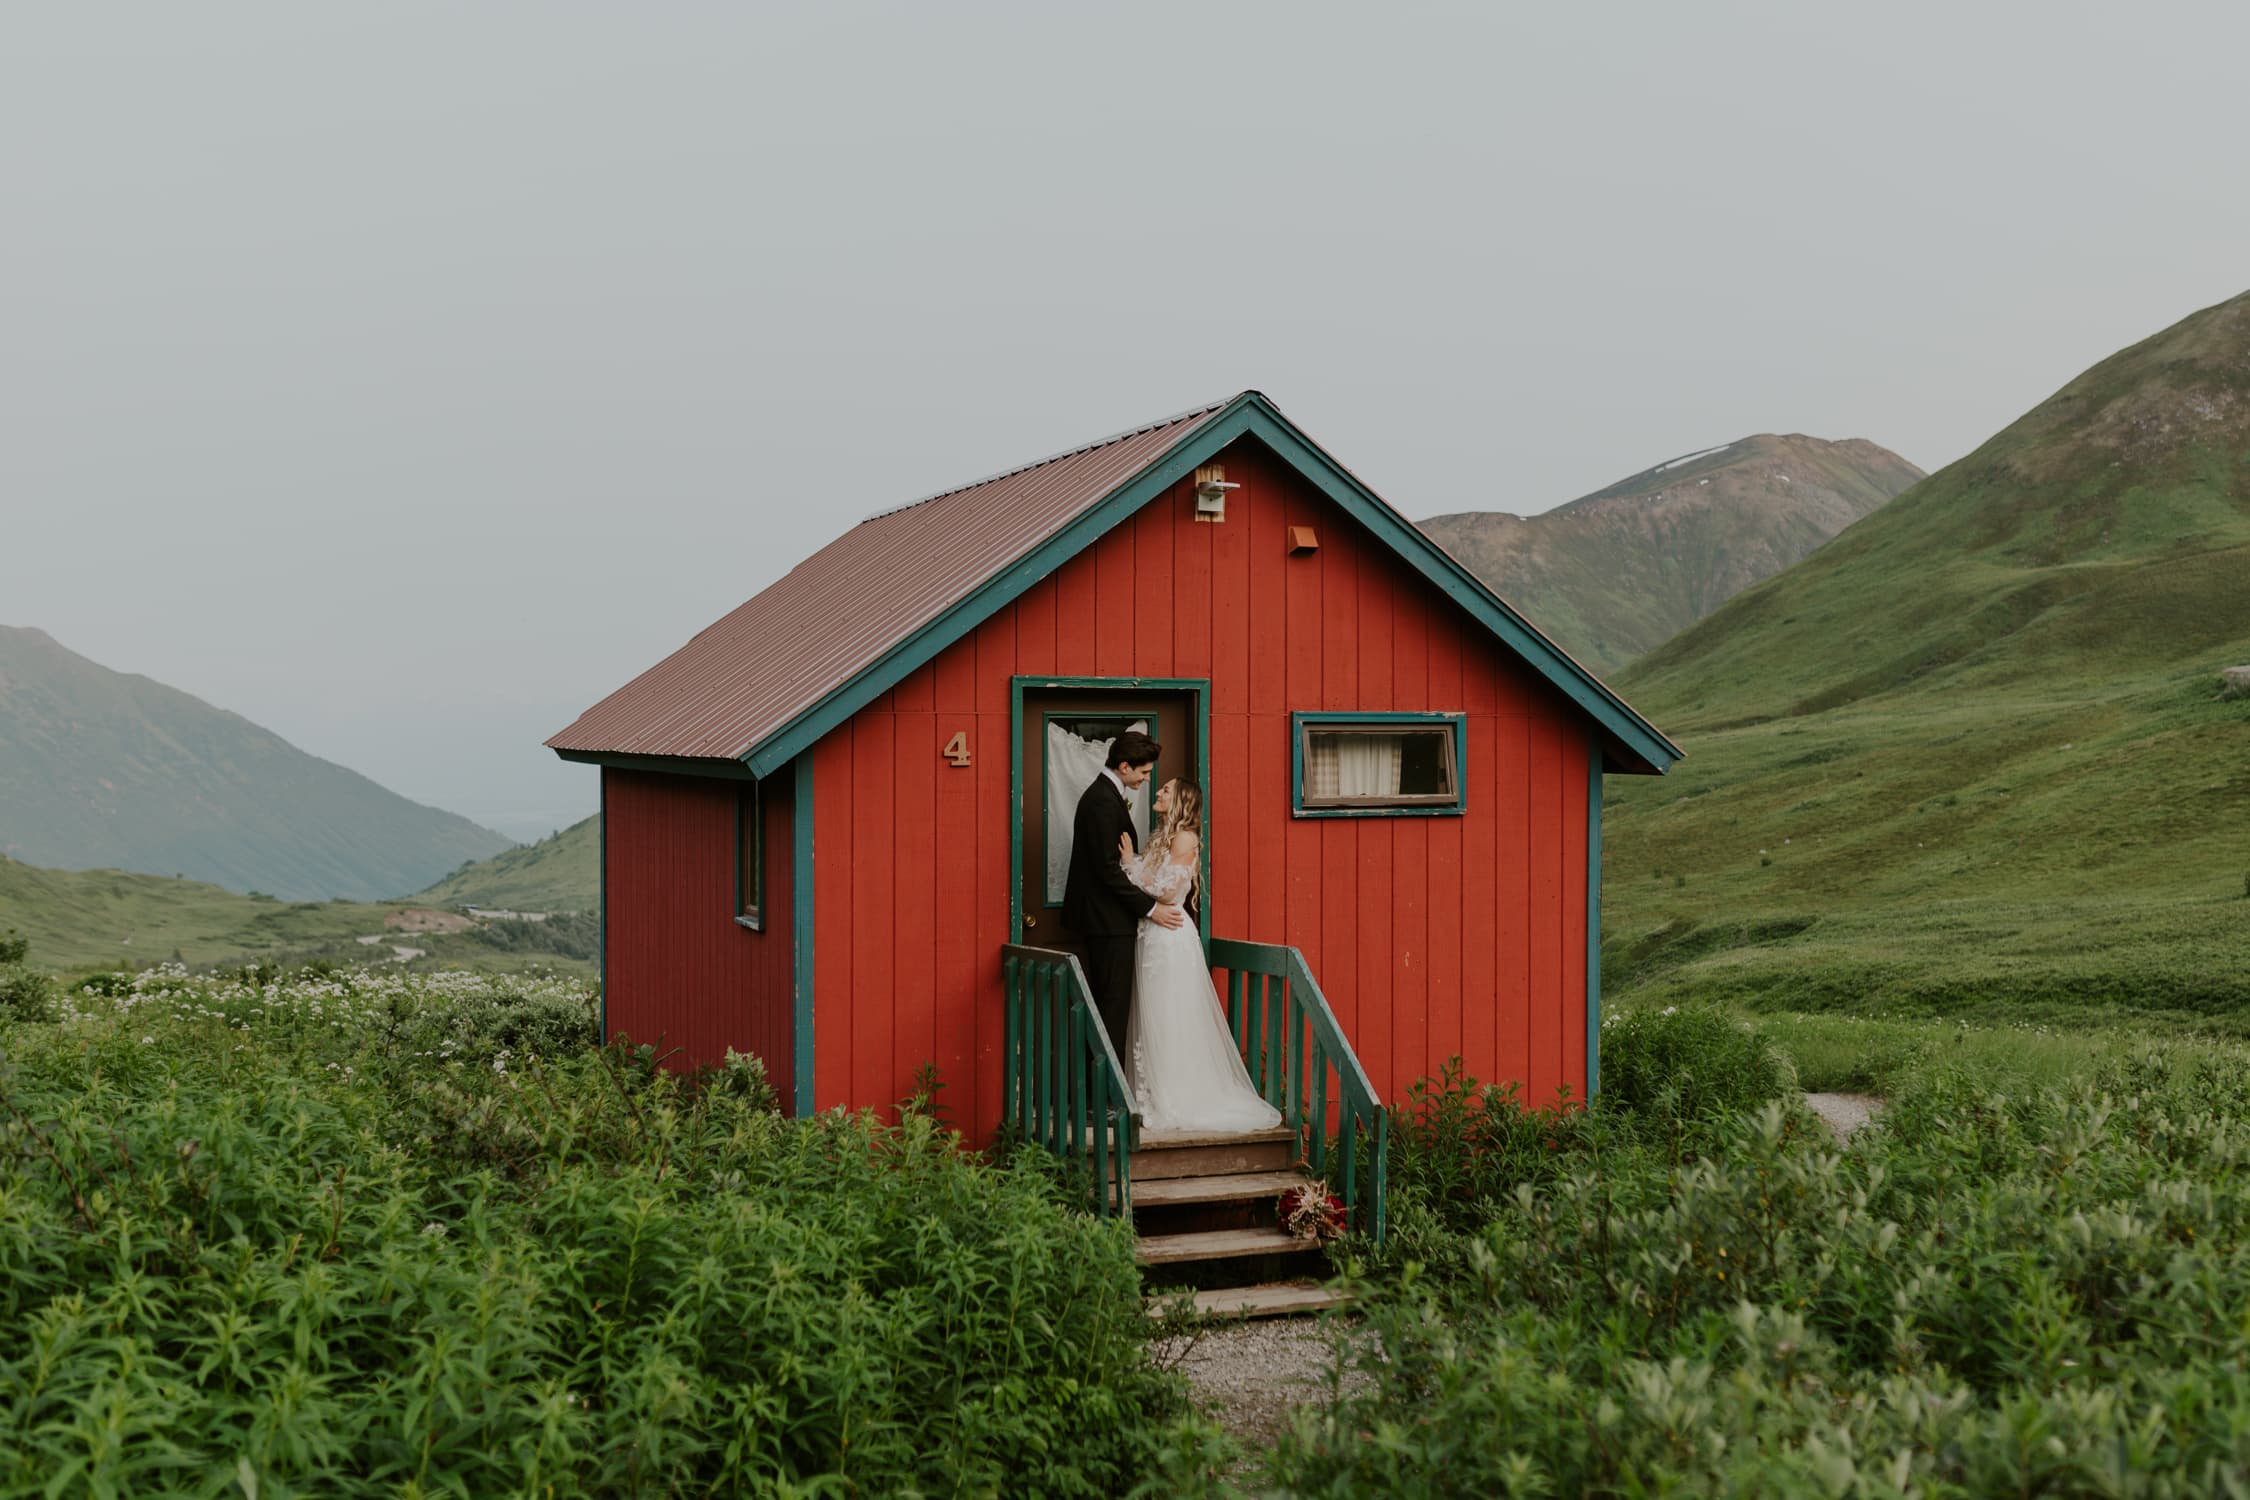 A bride and groom looking up at each other in front of a red cabin in Alaska.